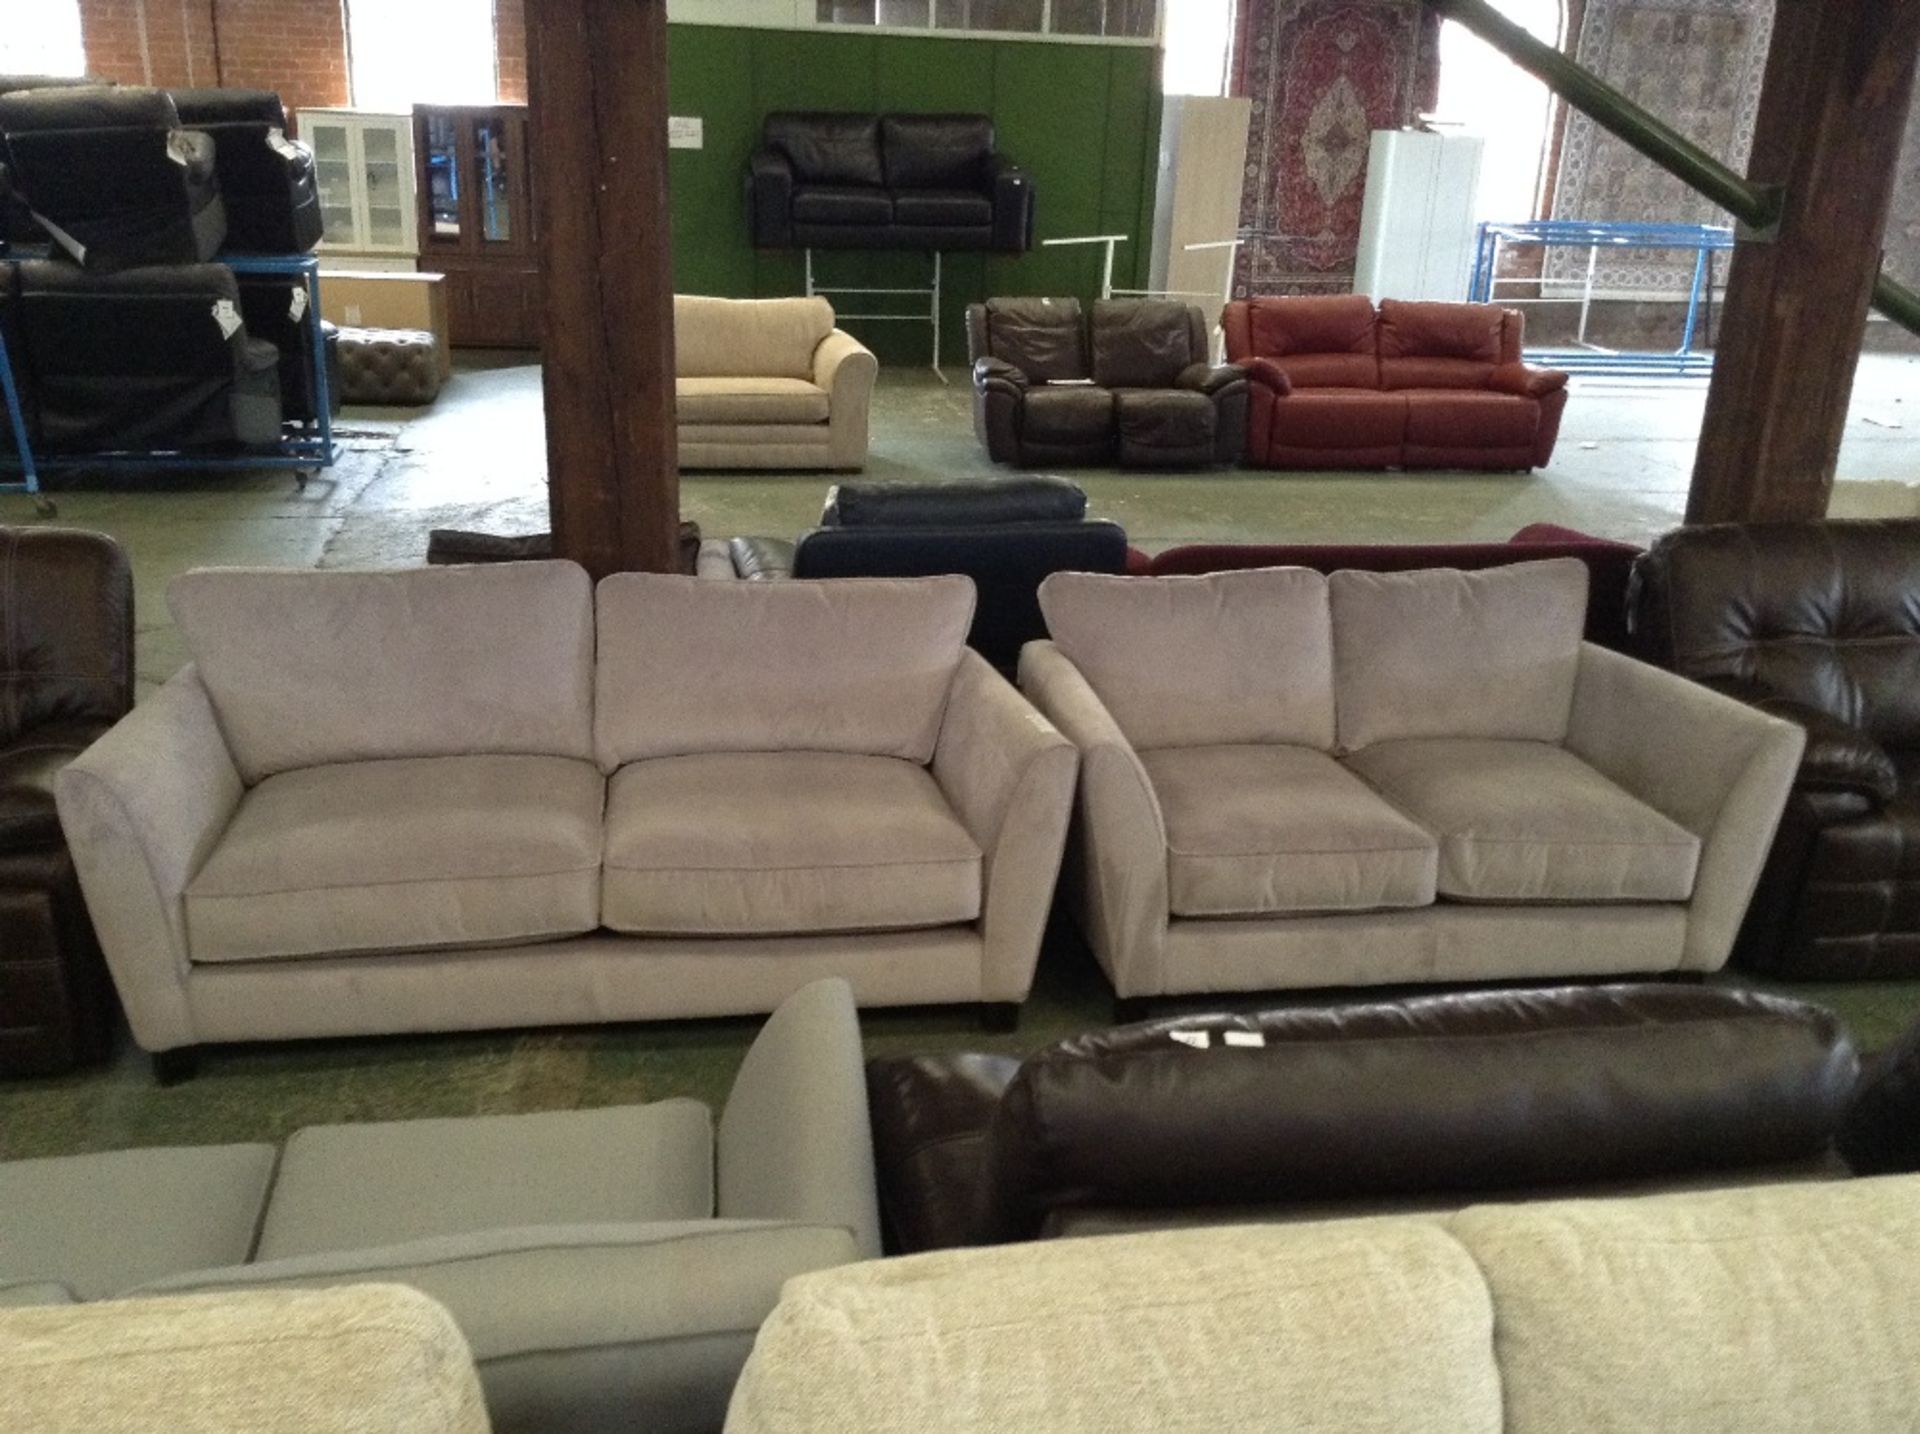 LILAC 3 SEATER AND 2 SEATER SOFA (4)